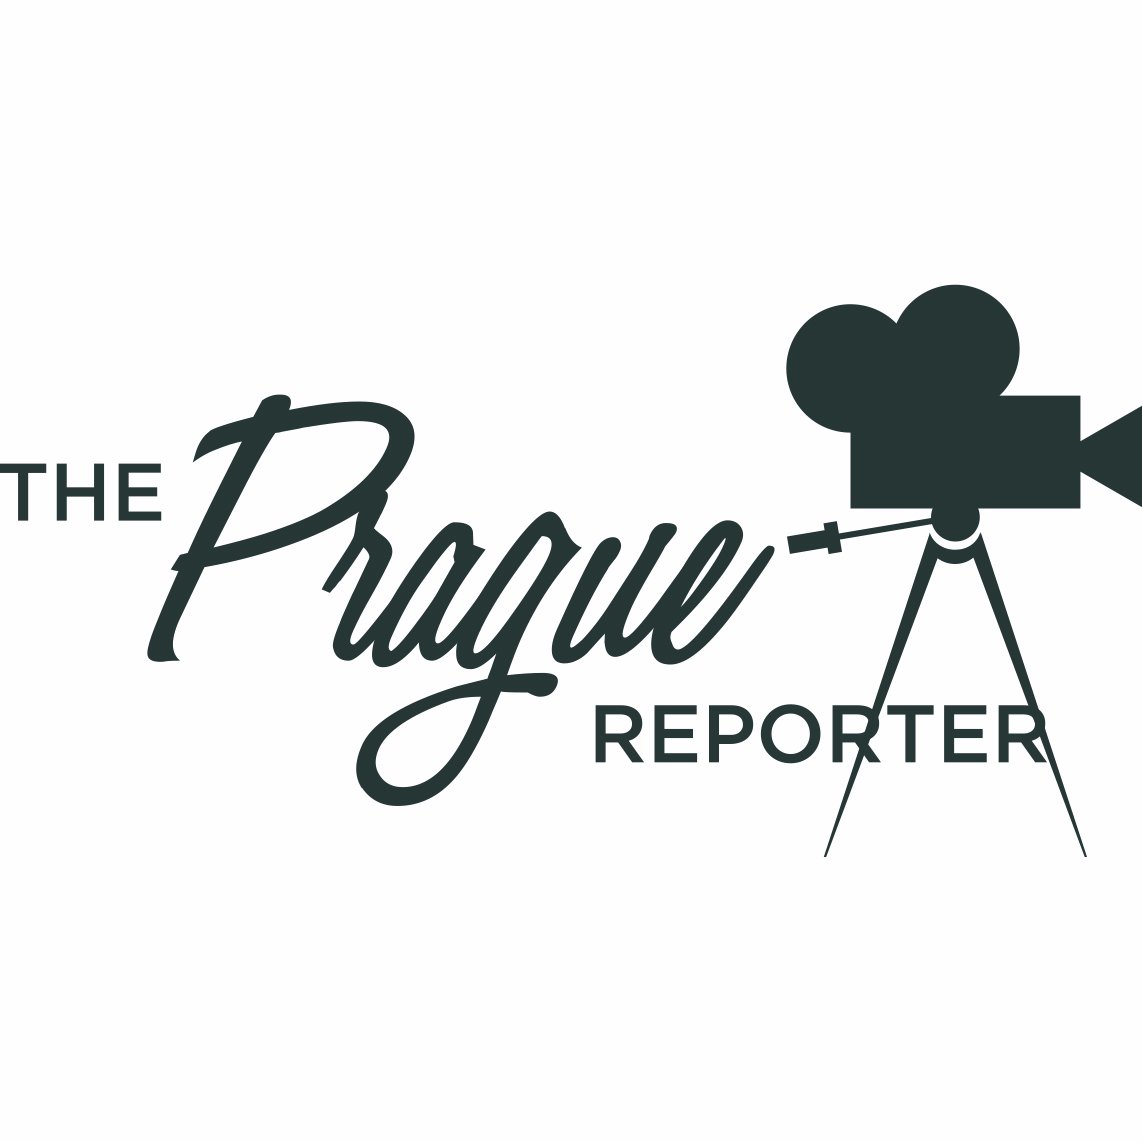 Online journal covering the Prague cinema scene, with the latest news about Czech movies and Hollywood projects now shooting in the Czech Republic.